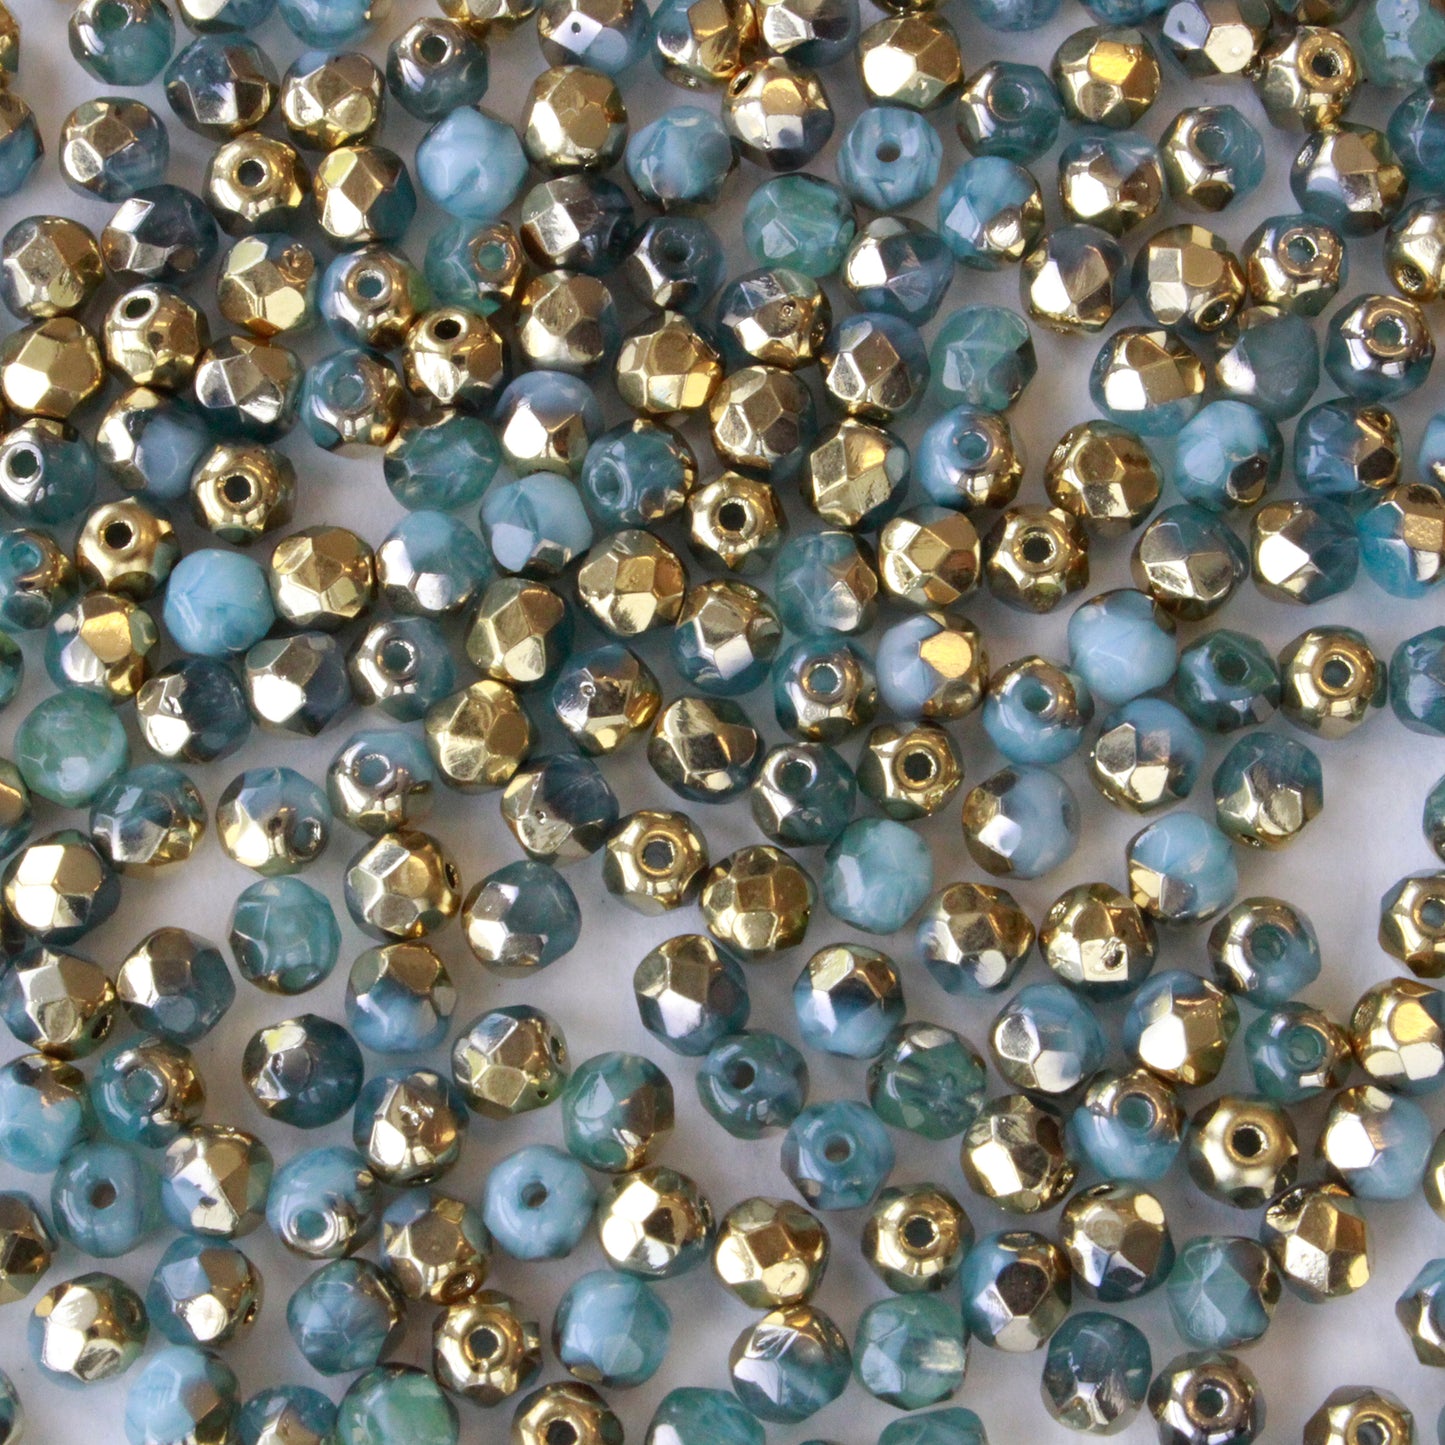 4mm Round Firepolished Beads - Aqua with Gold  - 100 beads